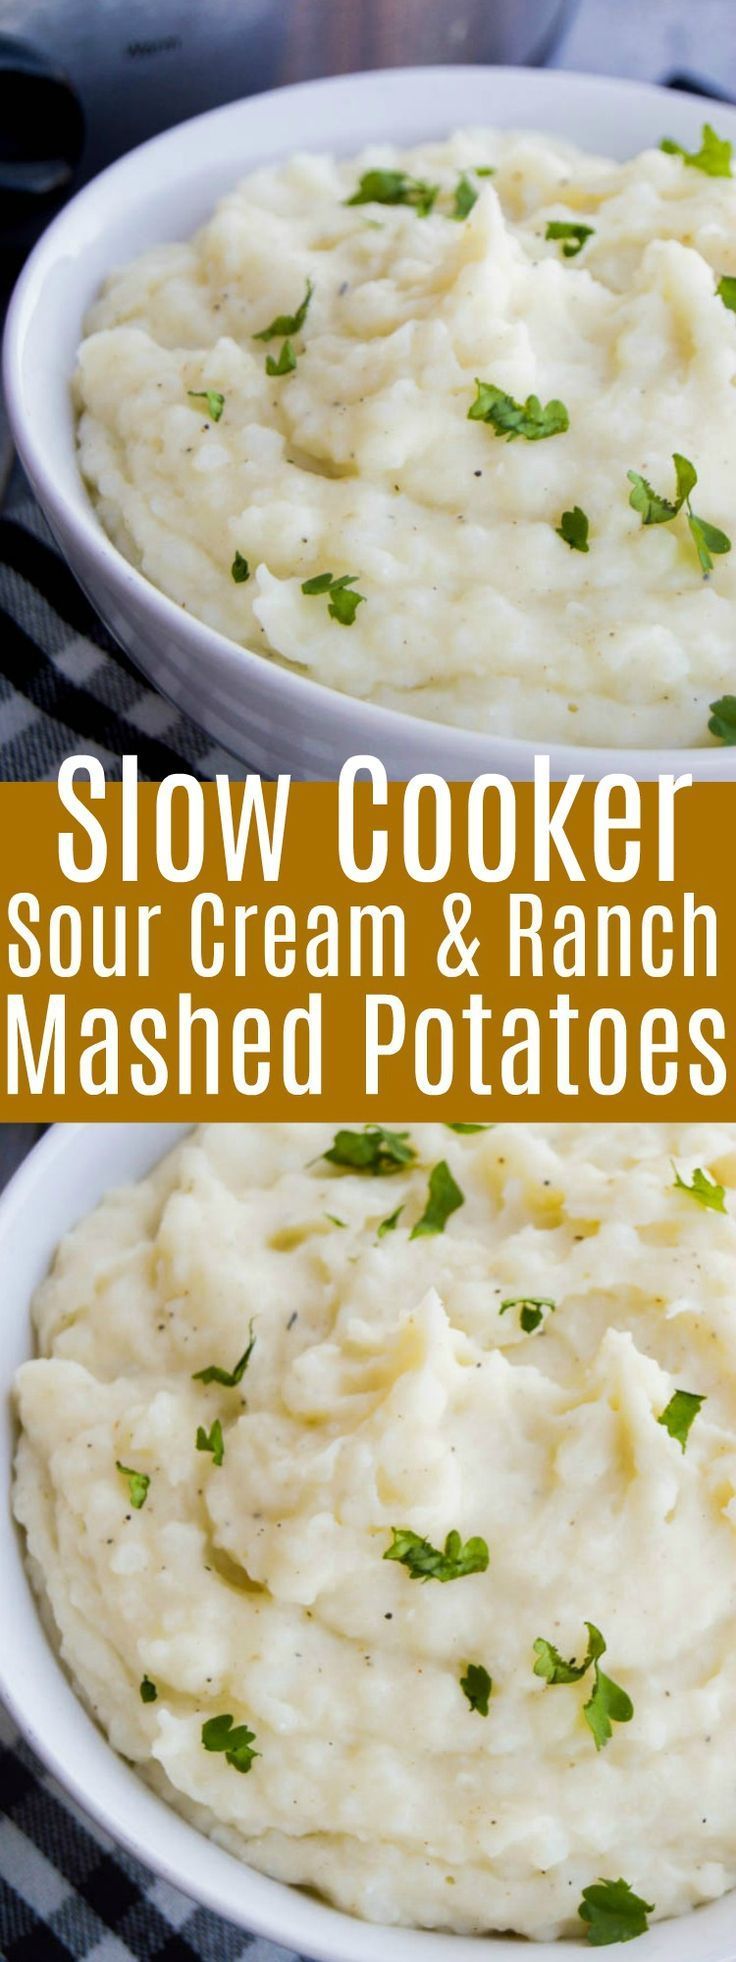 Slow Cooker Sour Cream and Ranch Mashed Potatoes. -   23 mashed pumpkin recipes
 ideas